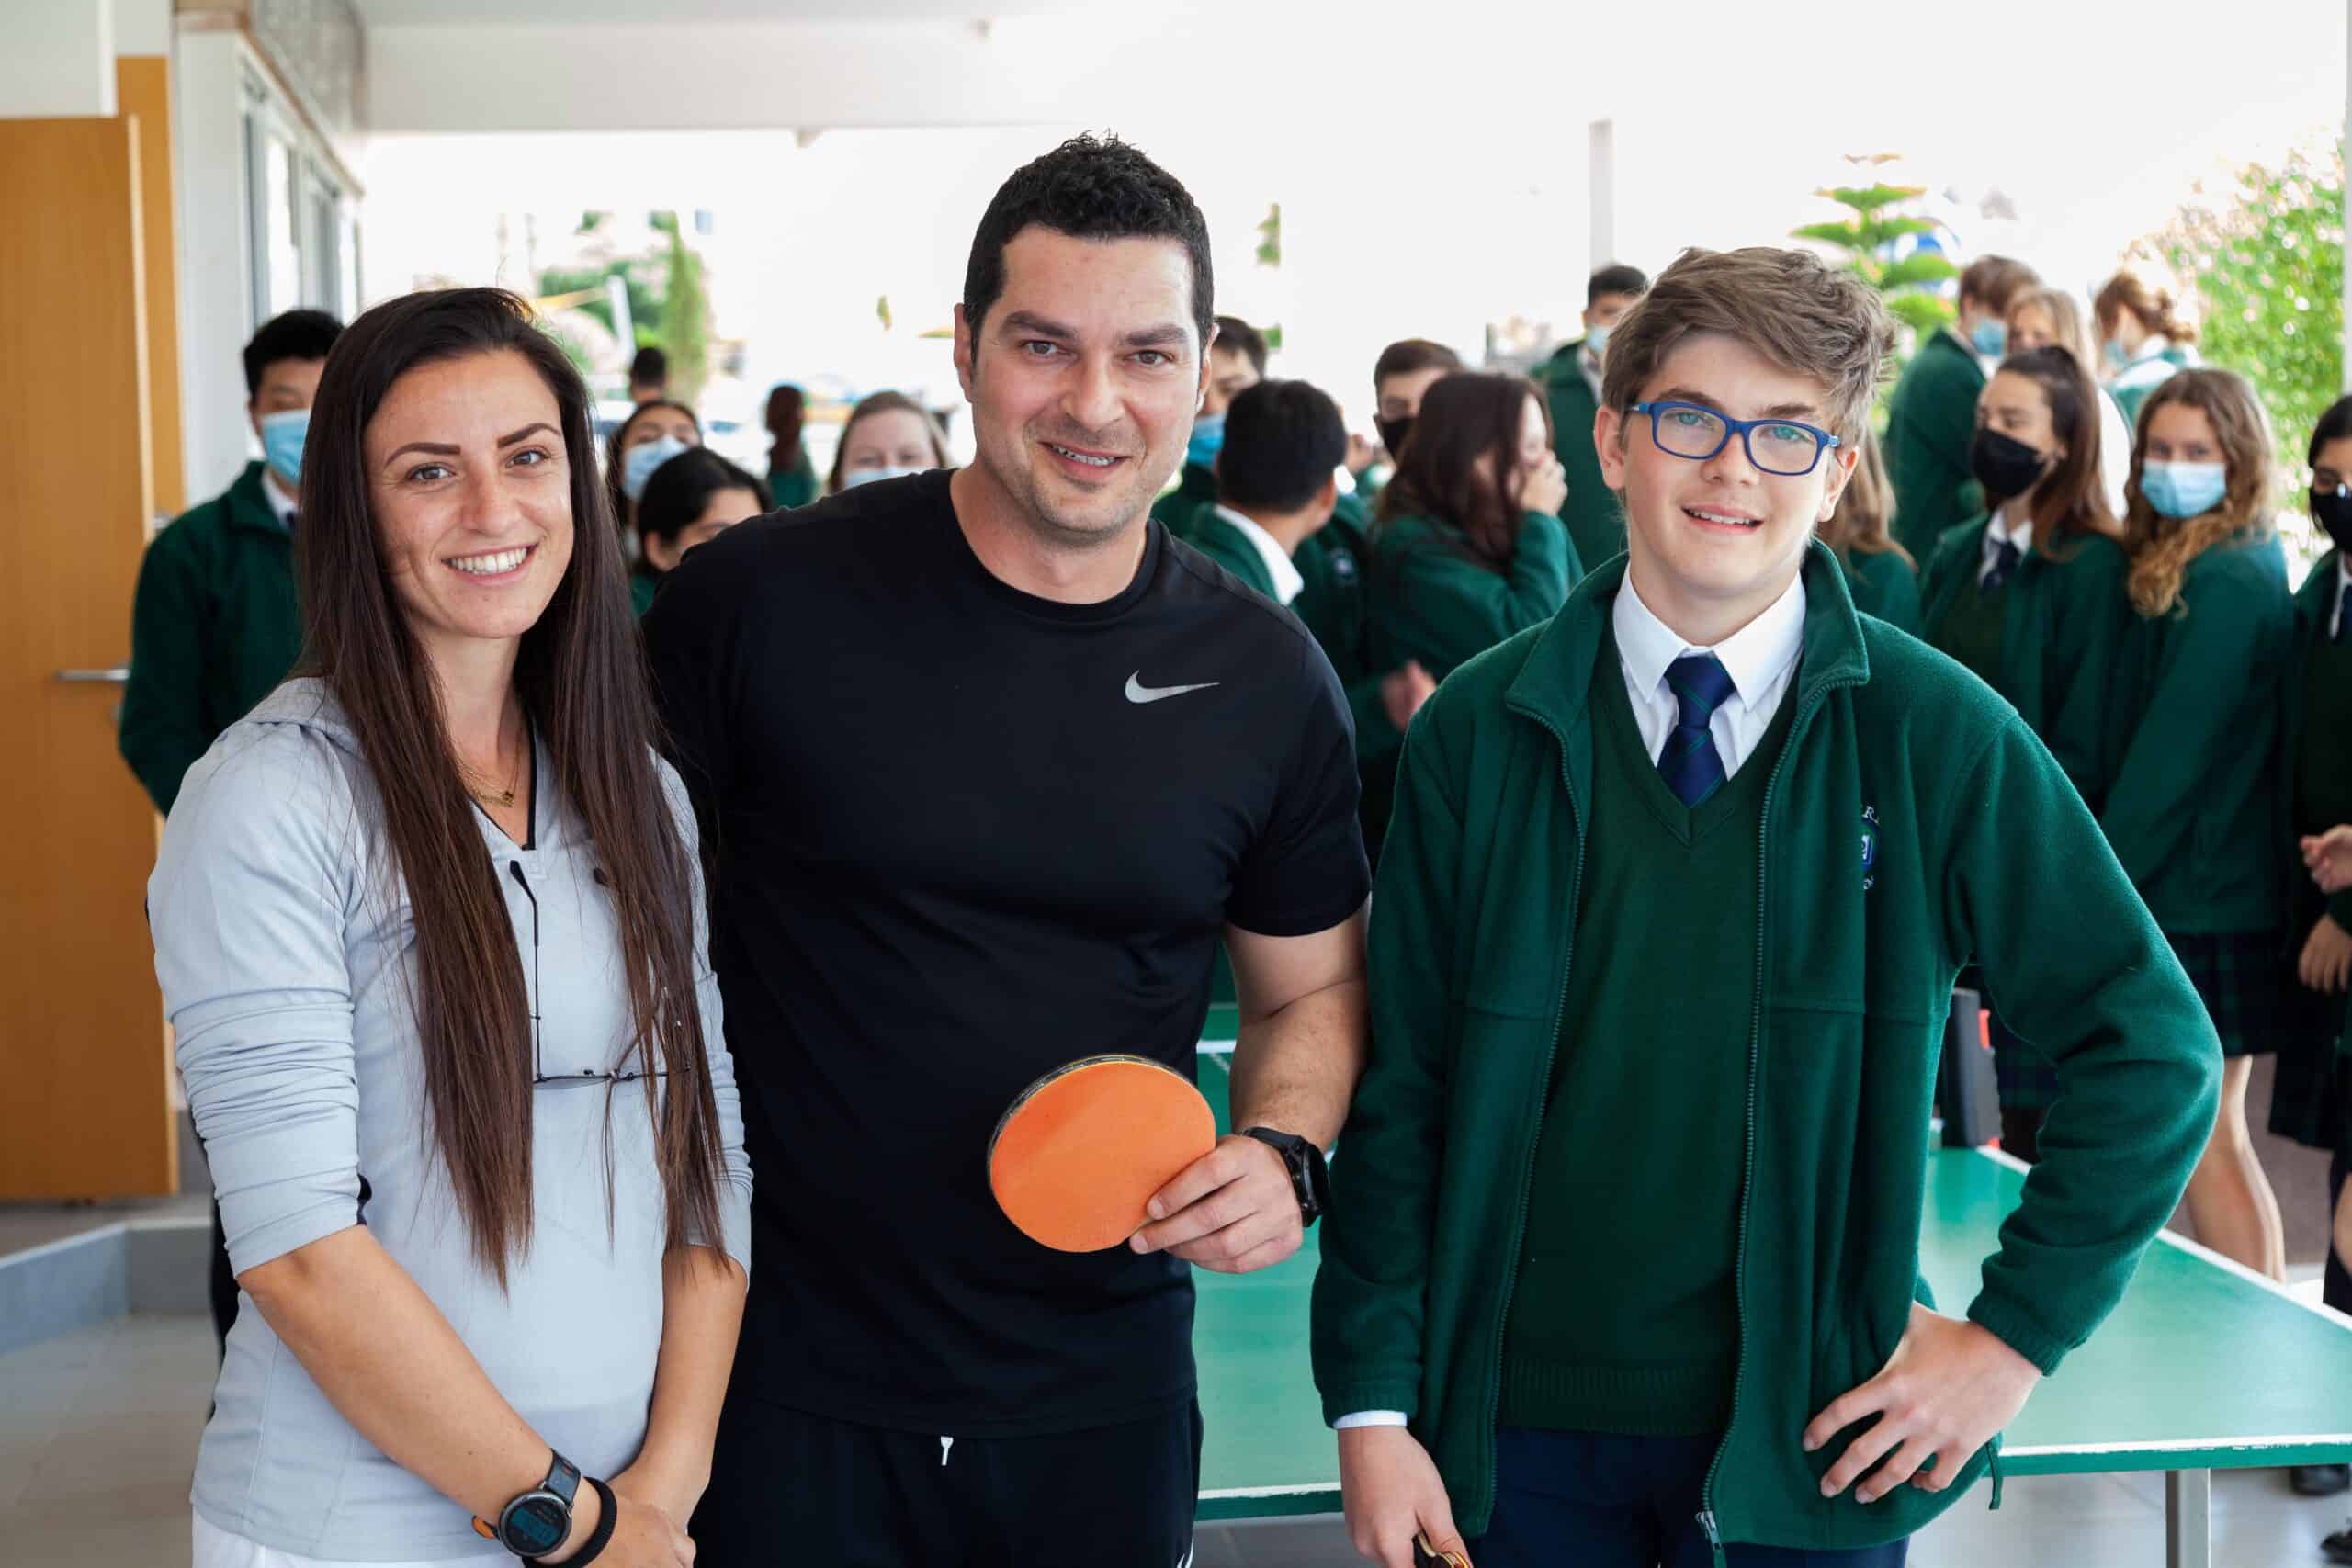 Aspire Private British School Paphos Cyprus - Charity table tennis match high resolution 15.04.21 40 of 40 scaled